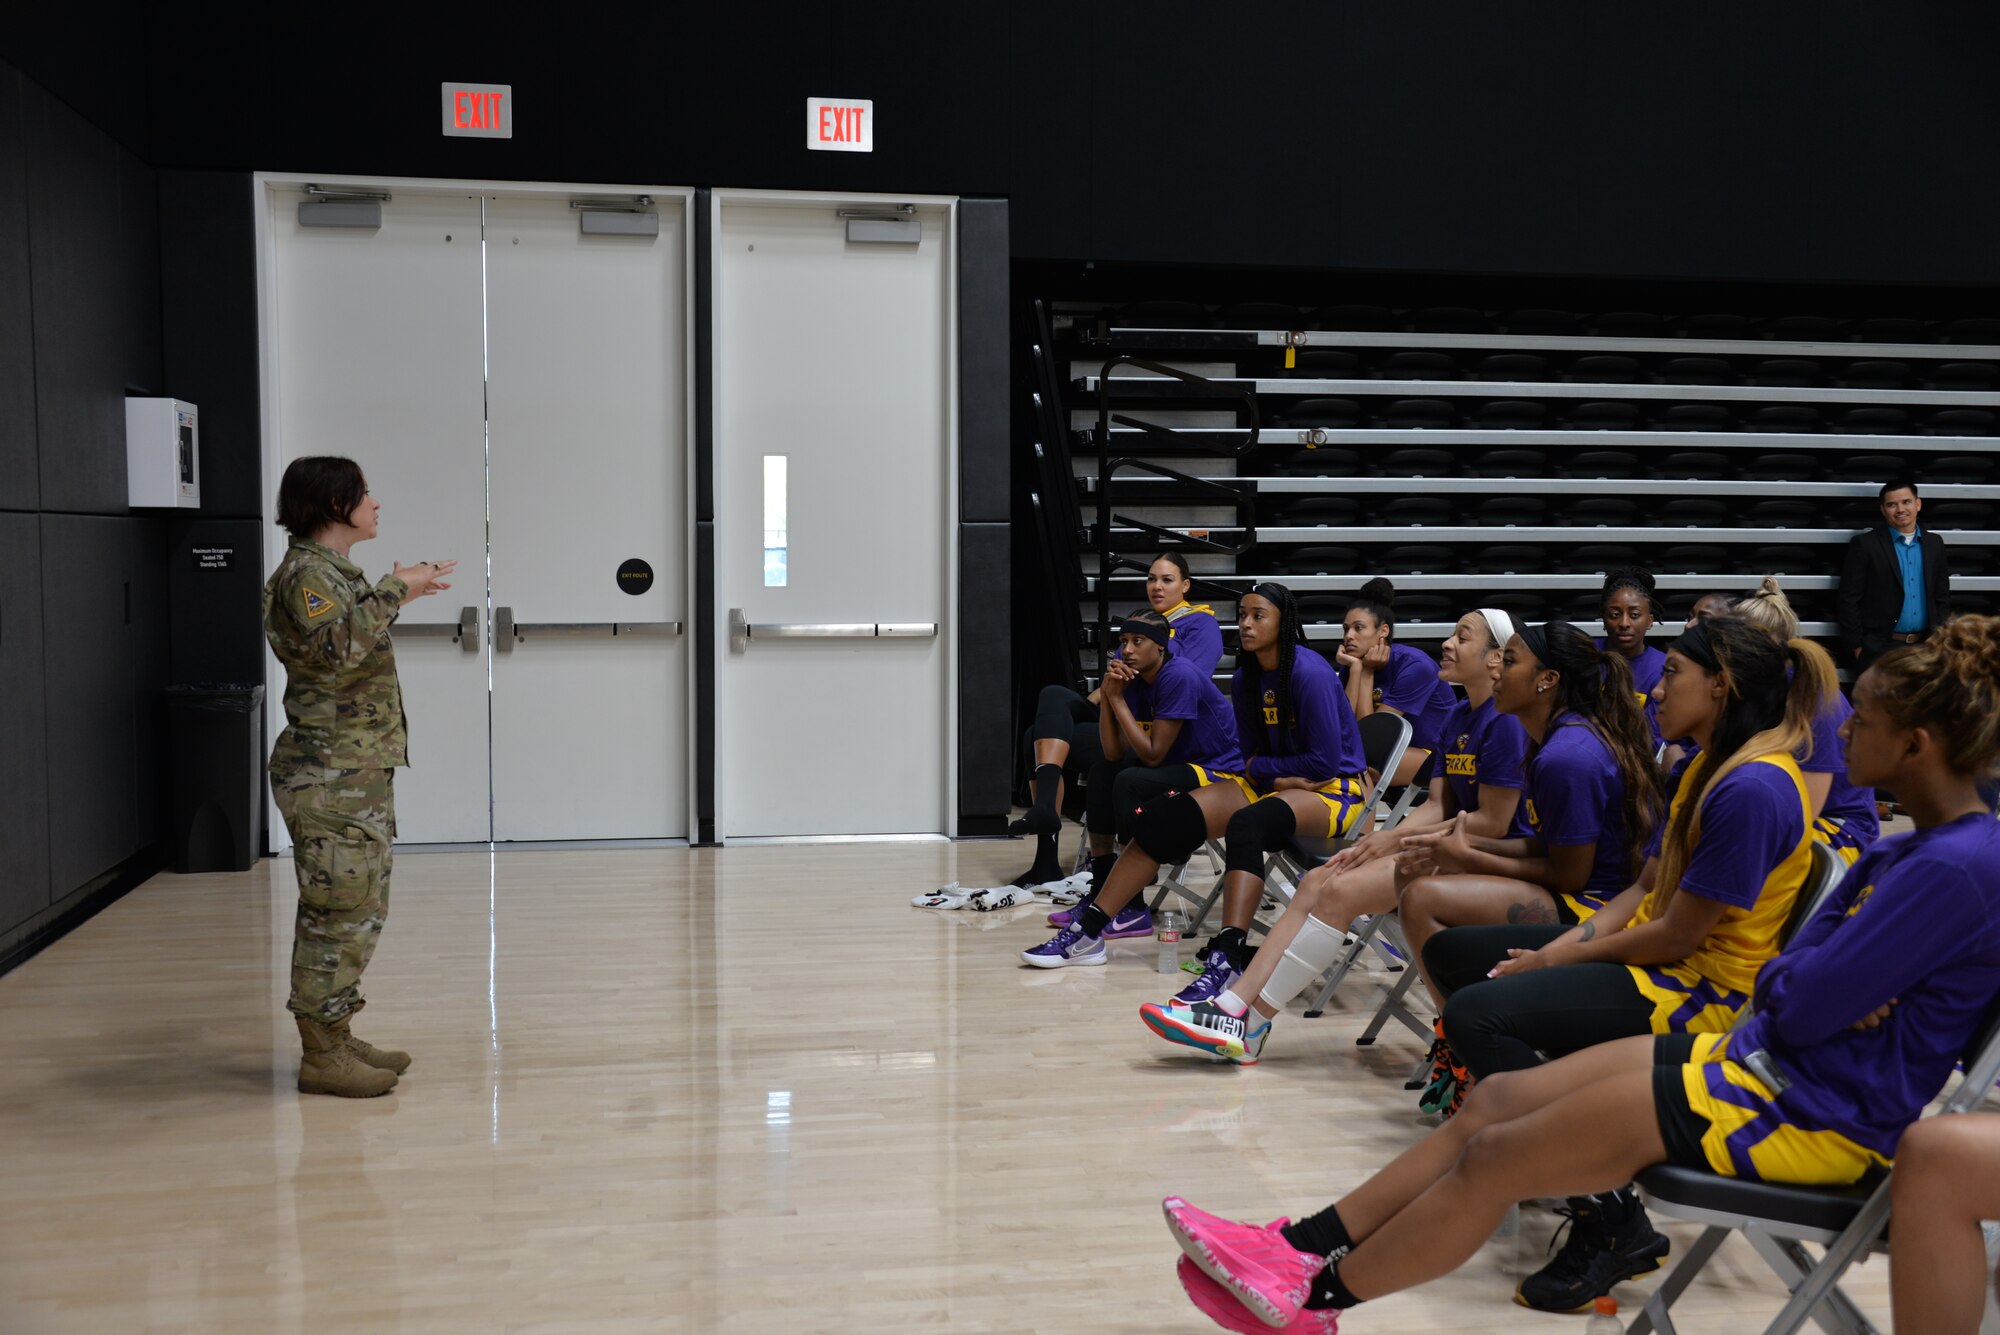 Col. Jennifer M. Krolikowski speaks to members of the L.A. Sparks about professional and personal challenges at one of the team’s training facilities near Los Angeles Air Force Base.